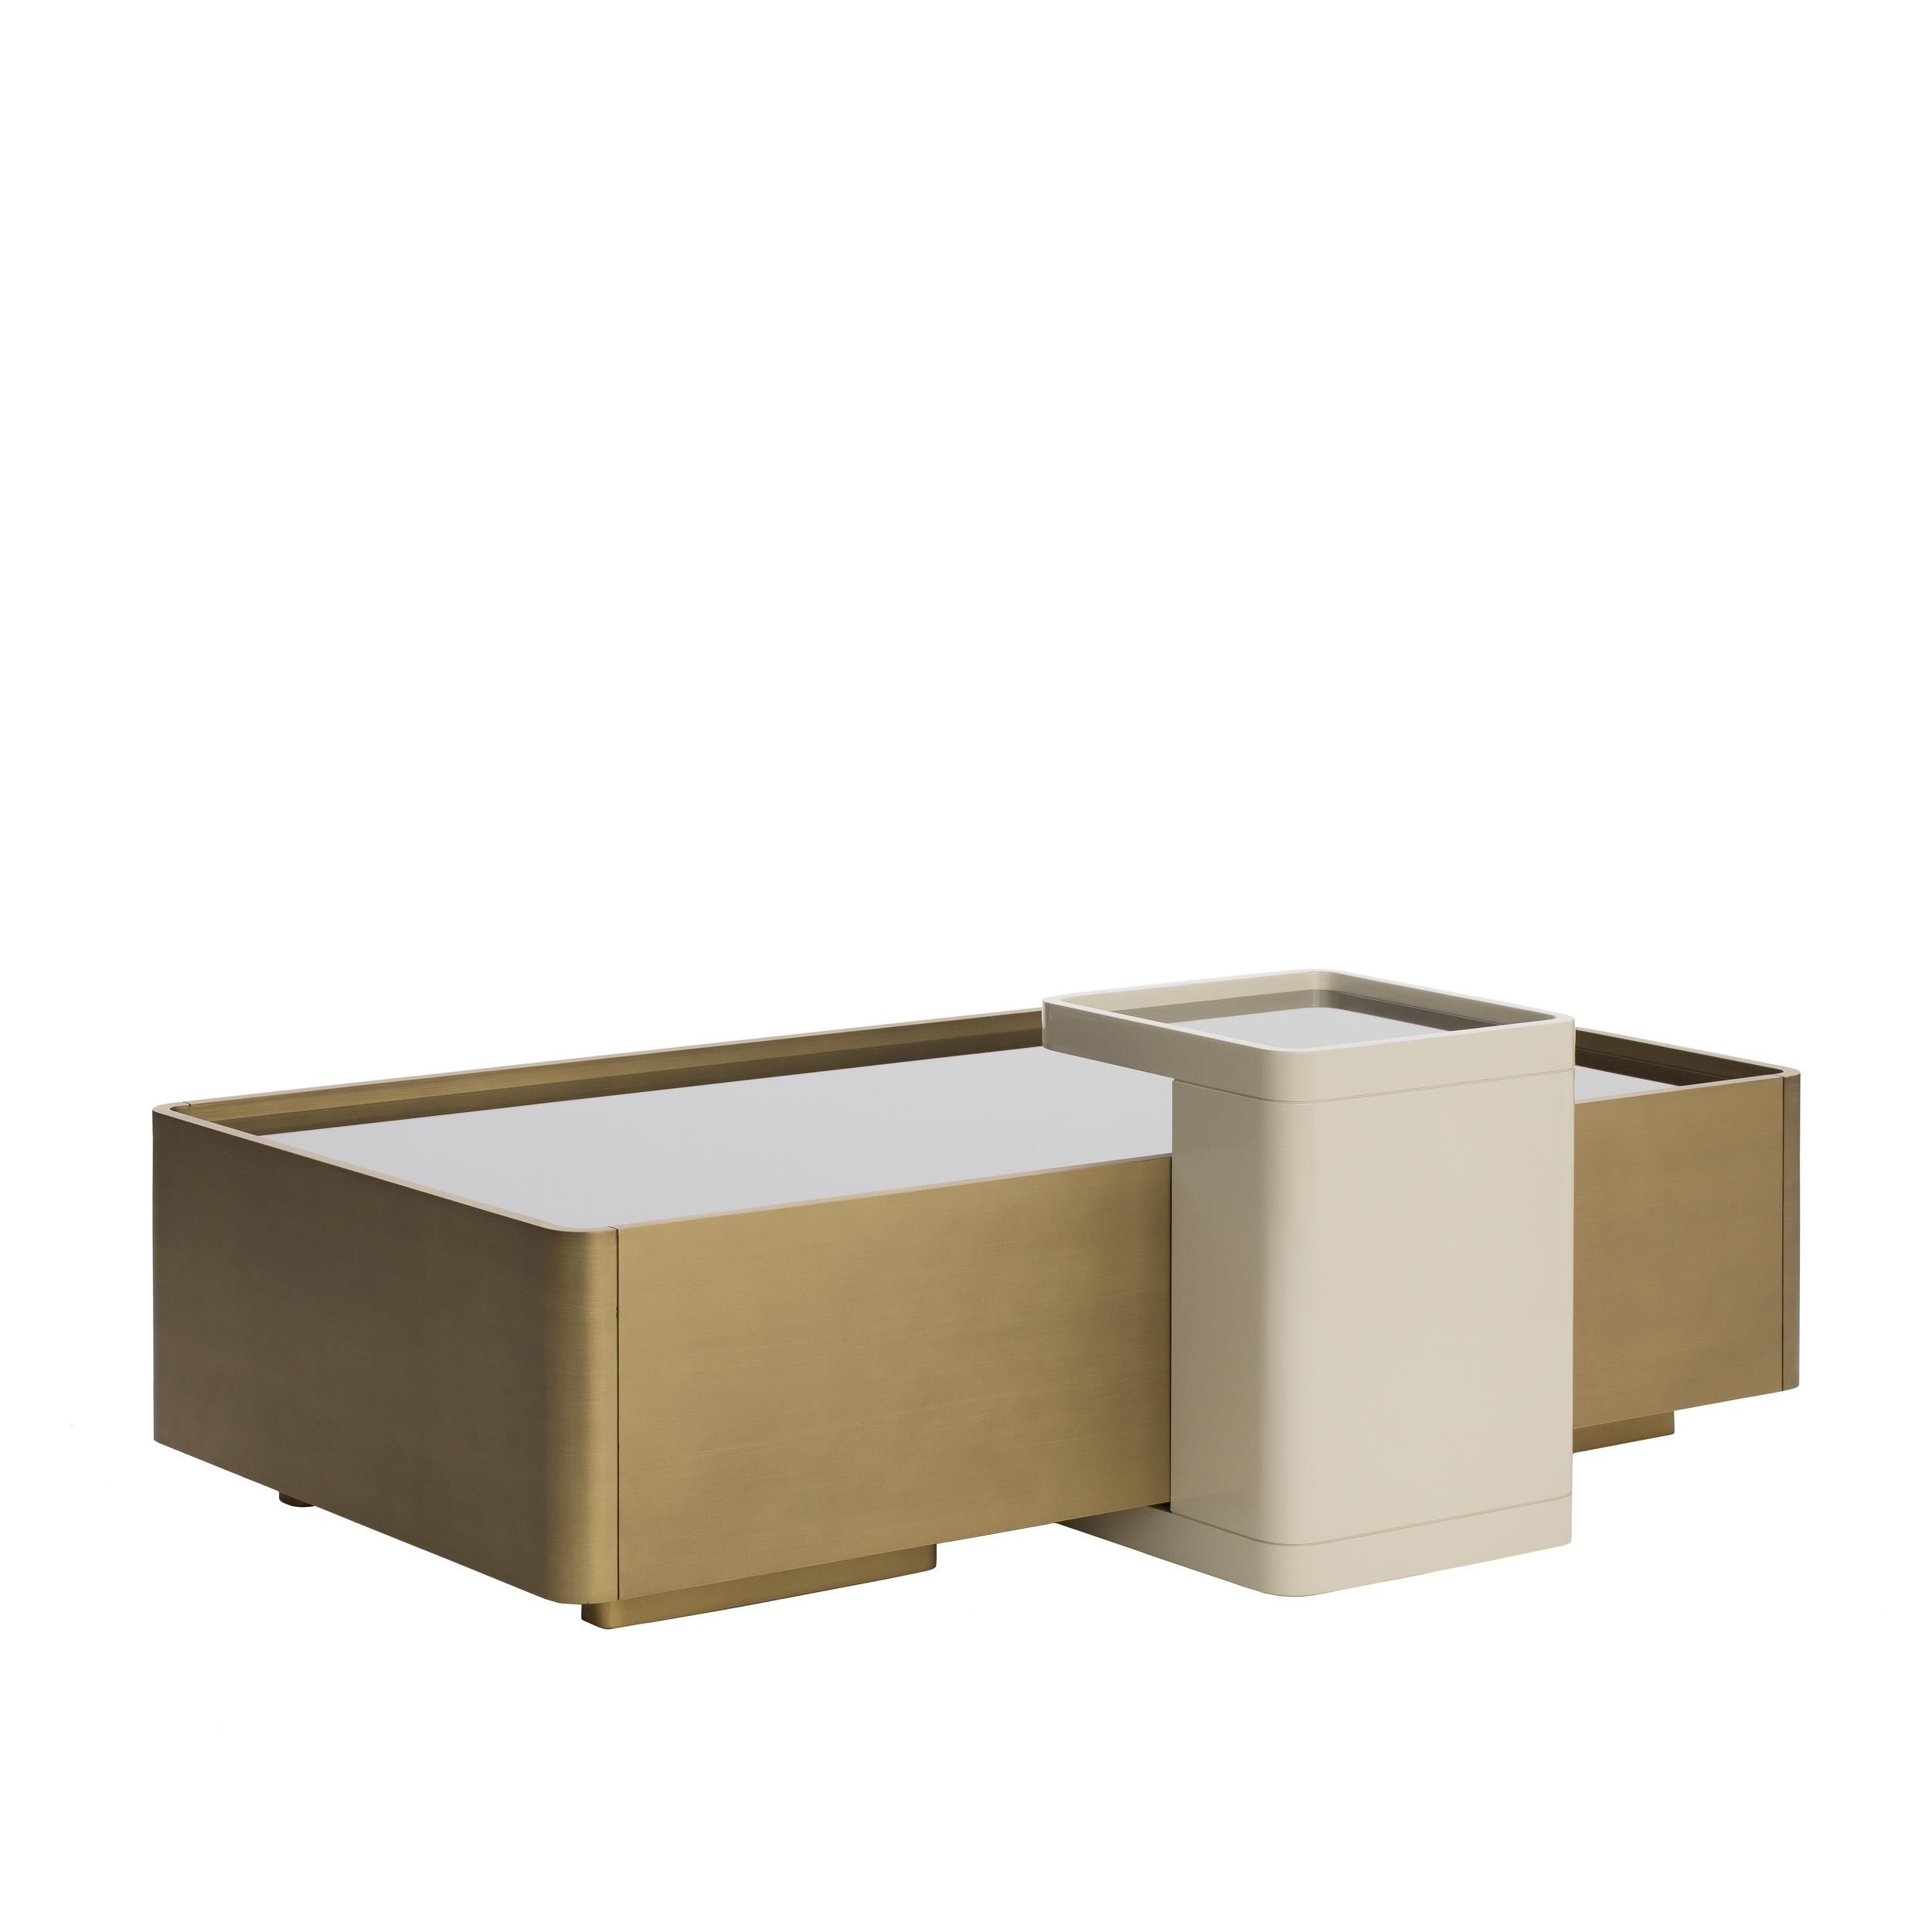 Sêni coffee table in wood veneer or lacquered structure with top in glass or mirror. 
It matches perfectly with the Sêni side table (not included), completing the set.
This coffee table is available in three sizes and is possible to customize it